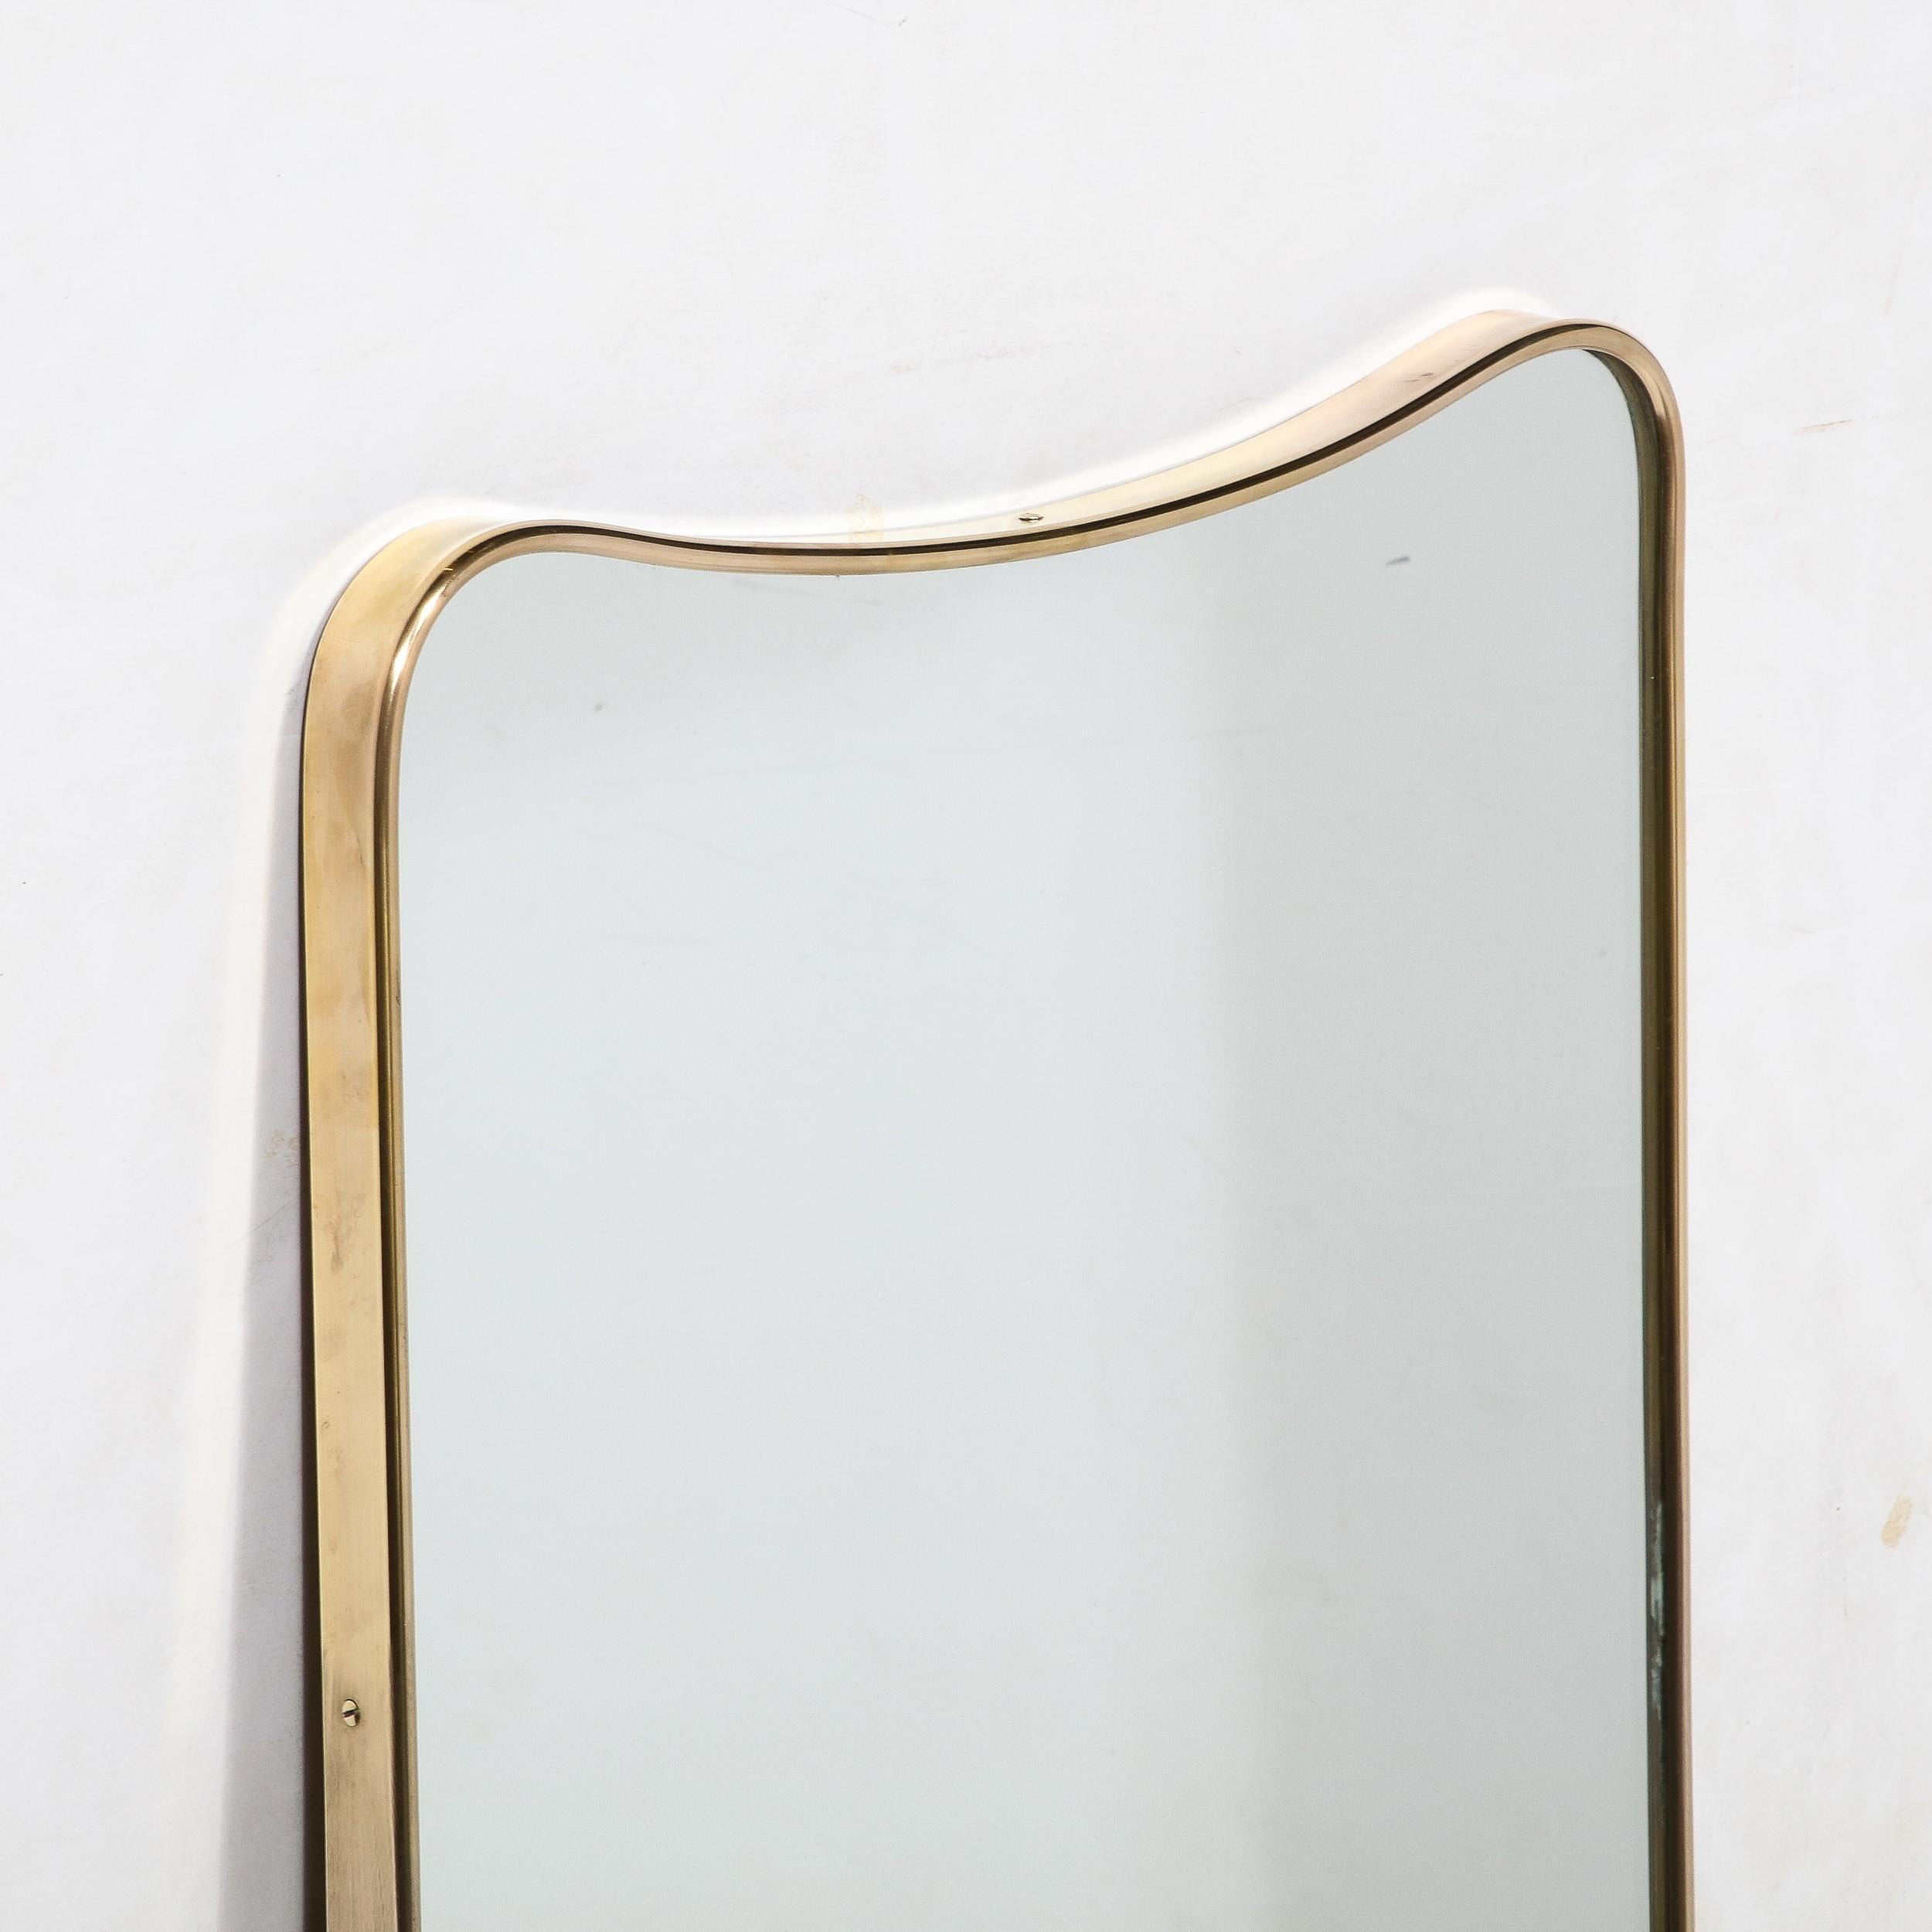 Italian Mid-Century Modernist Brass Wrapped Mirror with Rounded Top Detailing